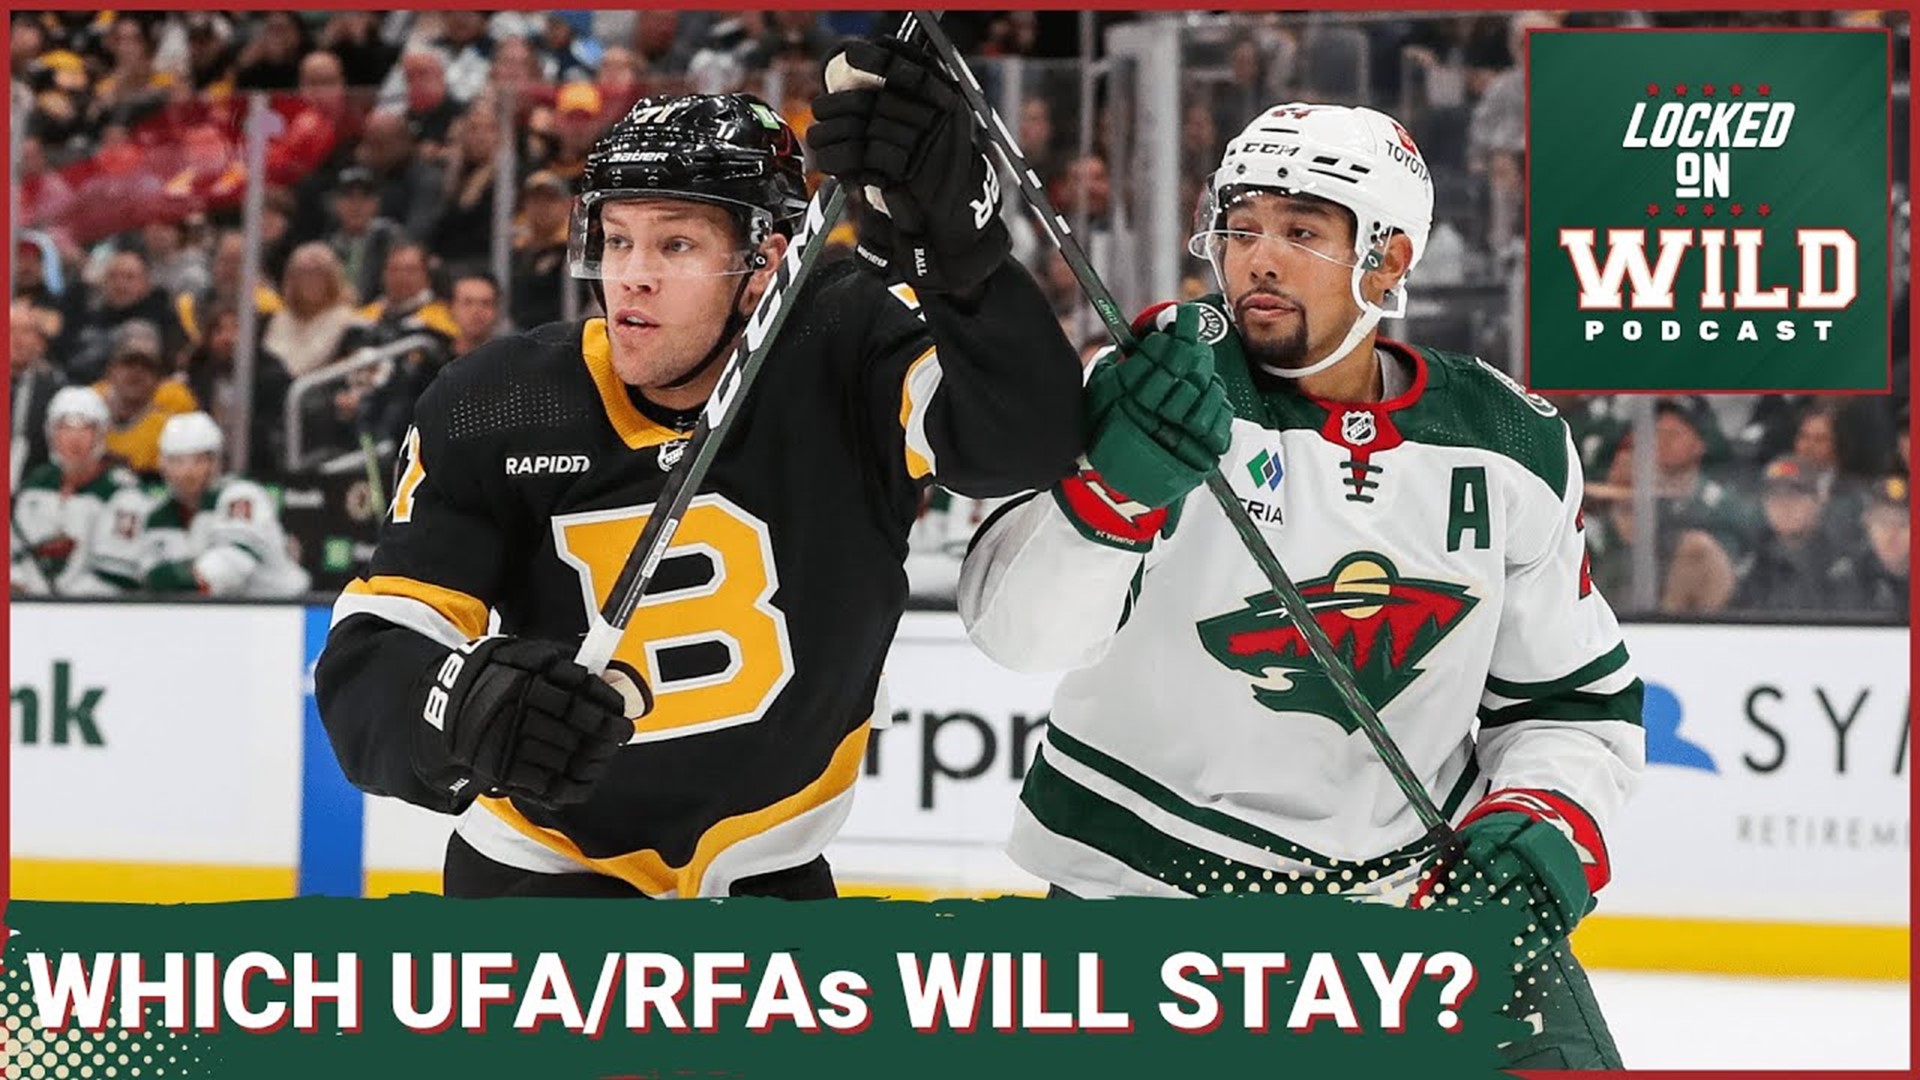 What should the Minnesota Wild do with their Impending UFA/RFAs?